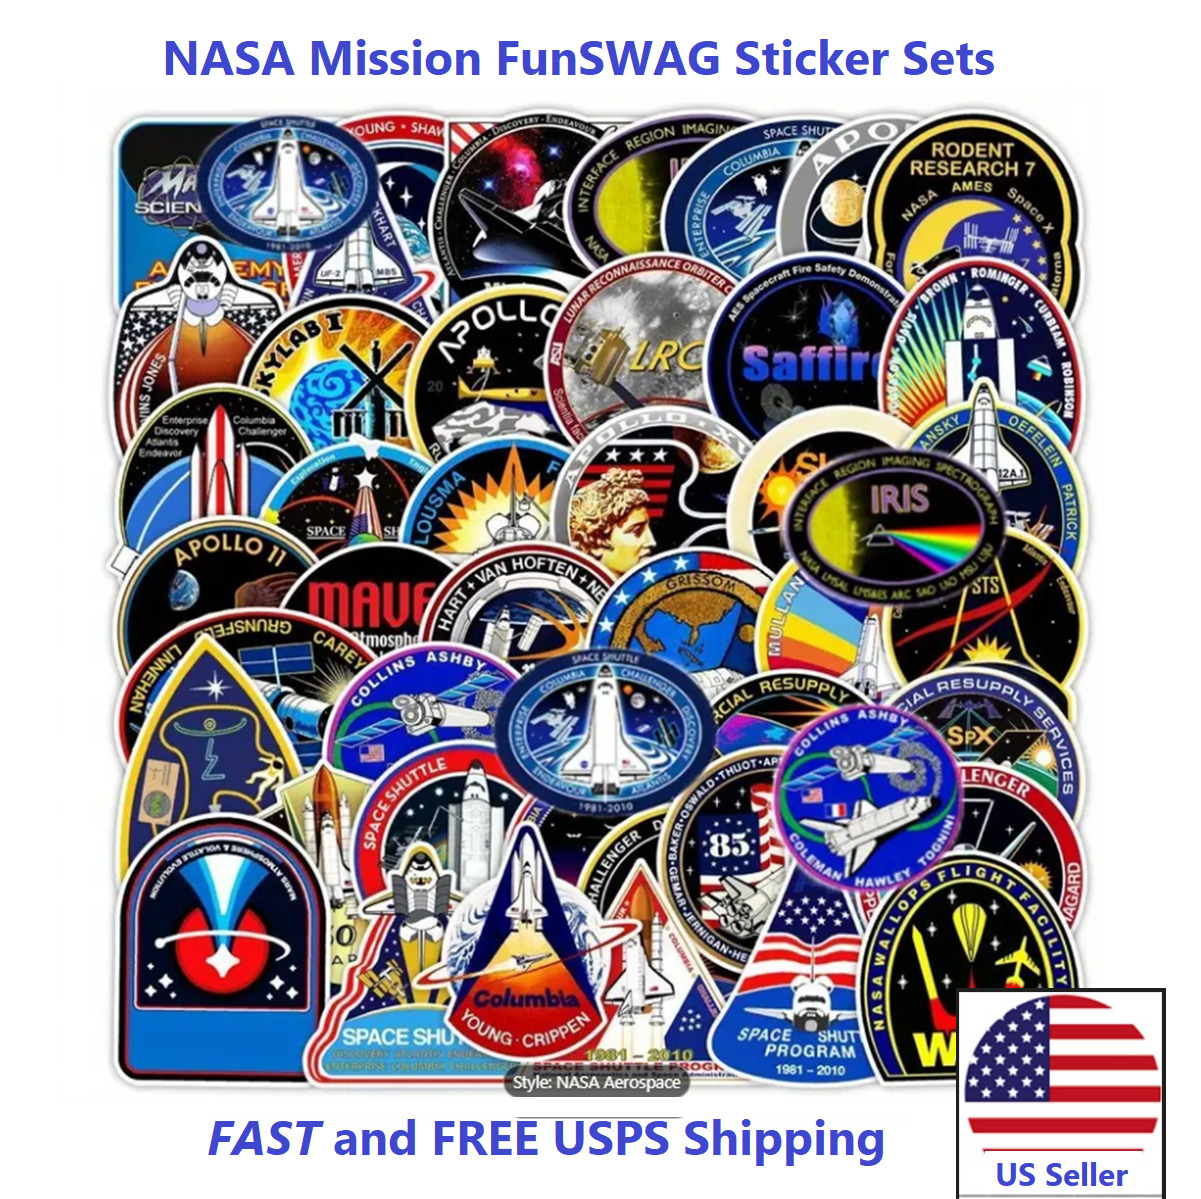 22 NASA Apollo Moon, Space Shuttle, SkyLab SpaceStation Mission Decal Stickers